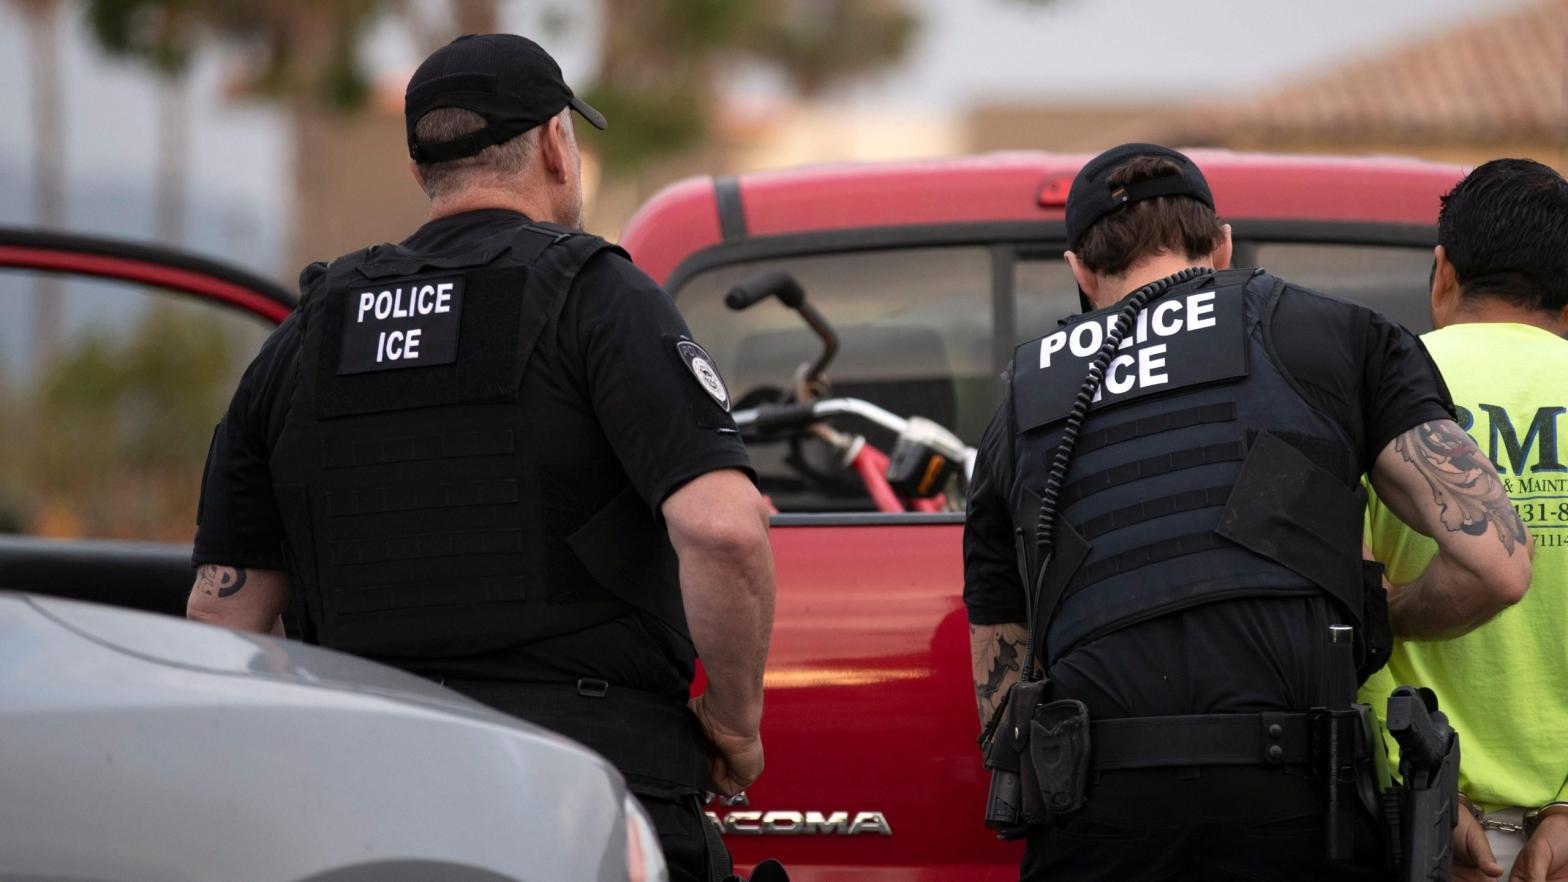 U.S. Immigration and Customs Enforcement officers conducting an arrest in Escondido, California, in July 2019; used here as stock photo. (Photo: Gregory Bull, AP)